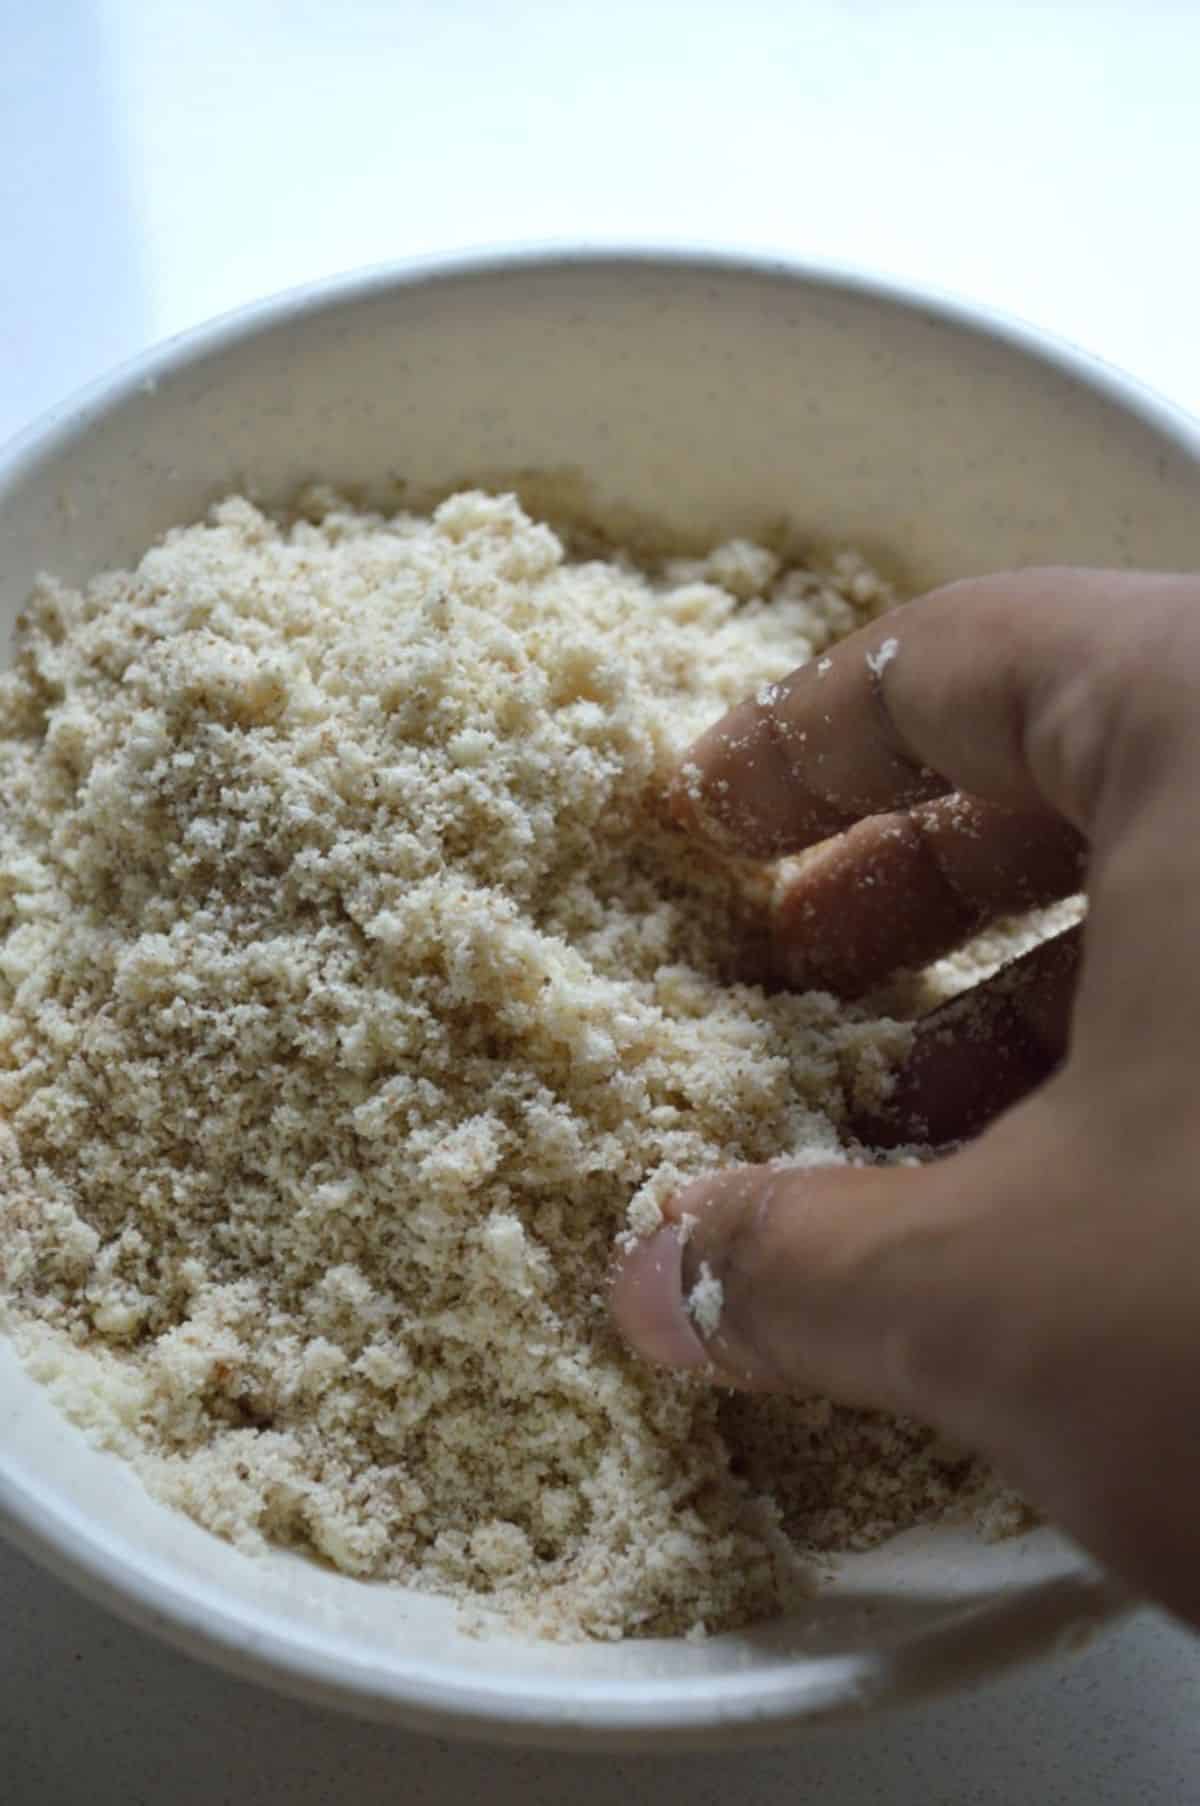 Hand mixing ingredients in a bowl.